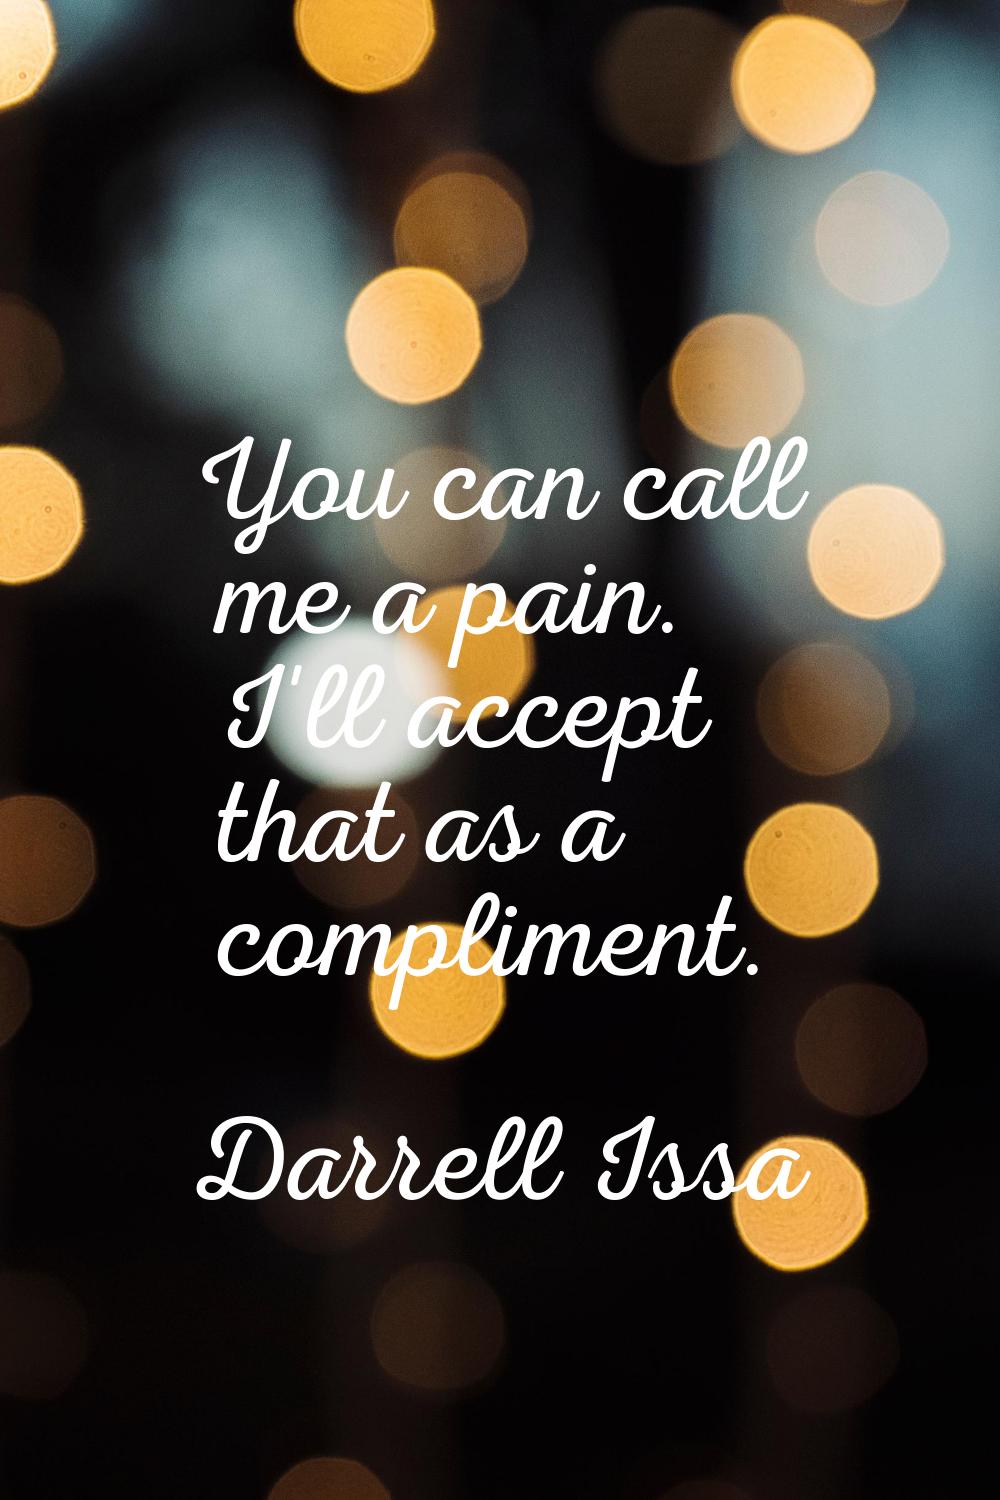 You can call me a pain. I'll accept that as a compliment.